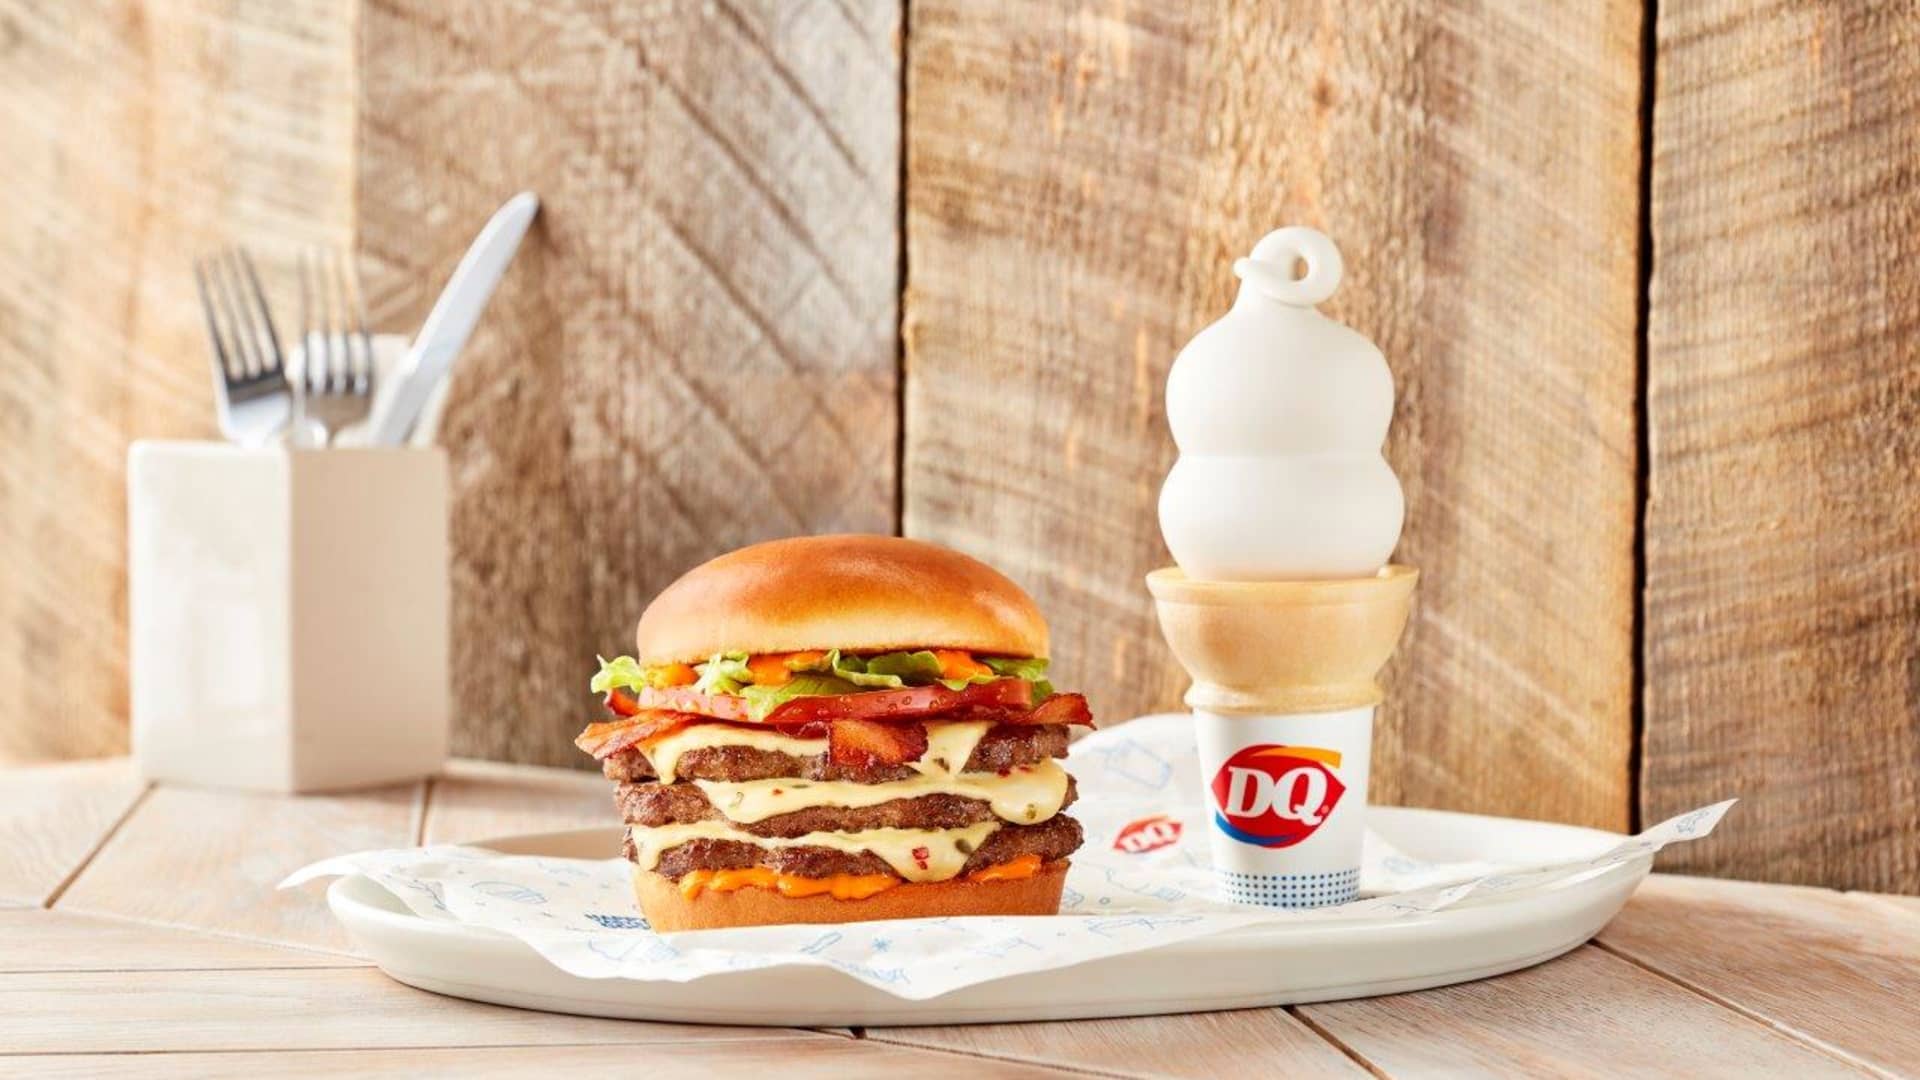 Dairy Queen launches Stackburger line as chain sees record sales in 2021 – CNBC